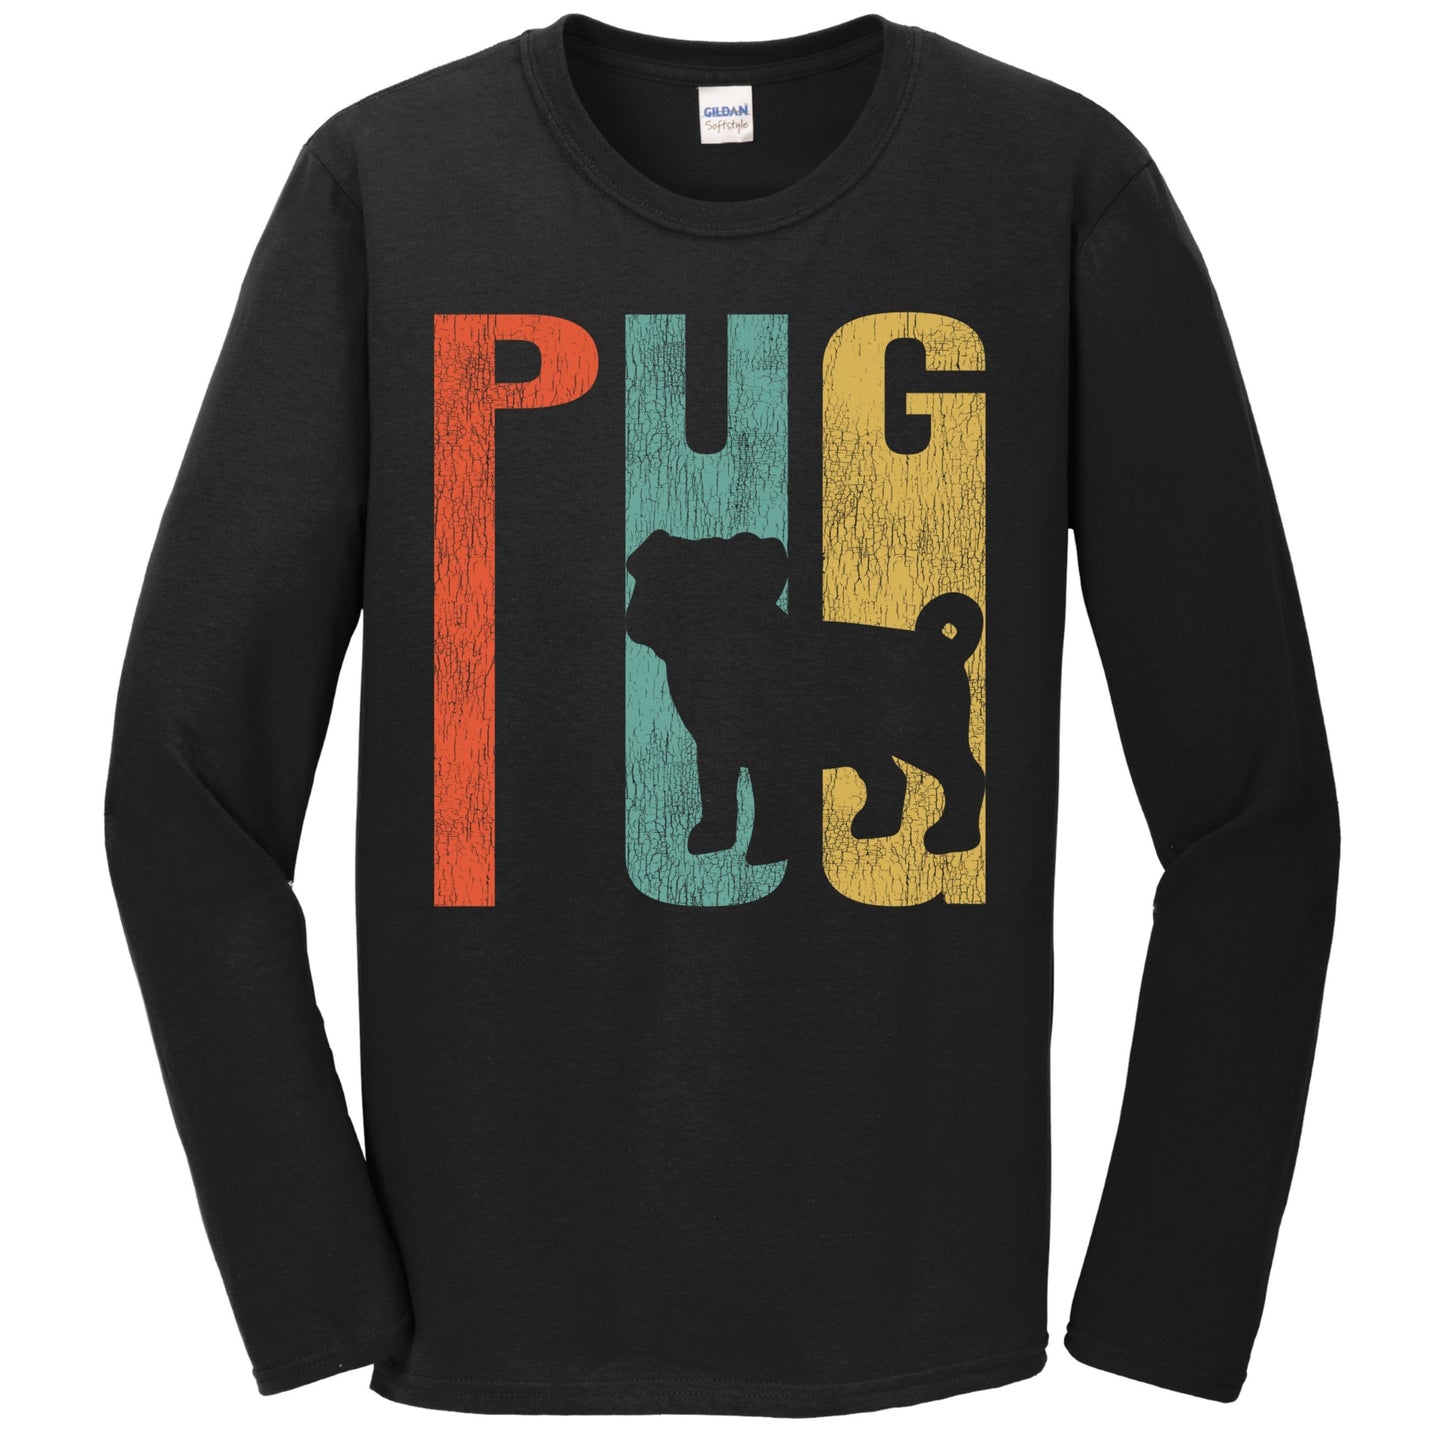 Retro 1970's Style Pug Dog Silhouette Cracked Distressed Long Sleeve T-Shirt